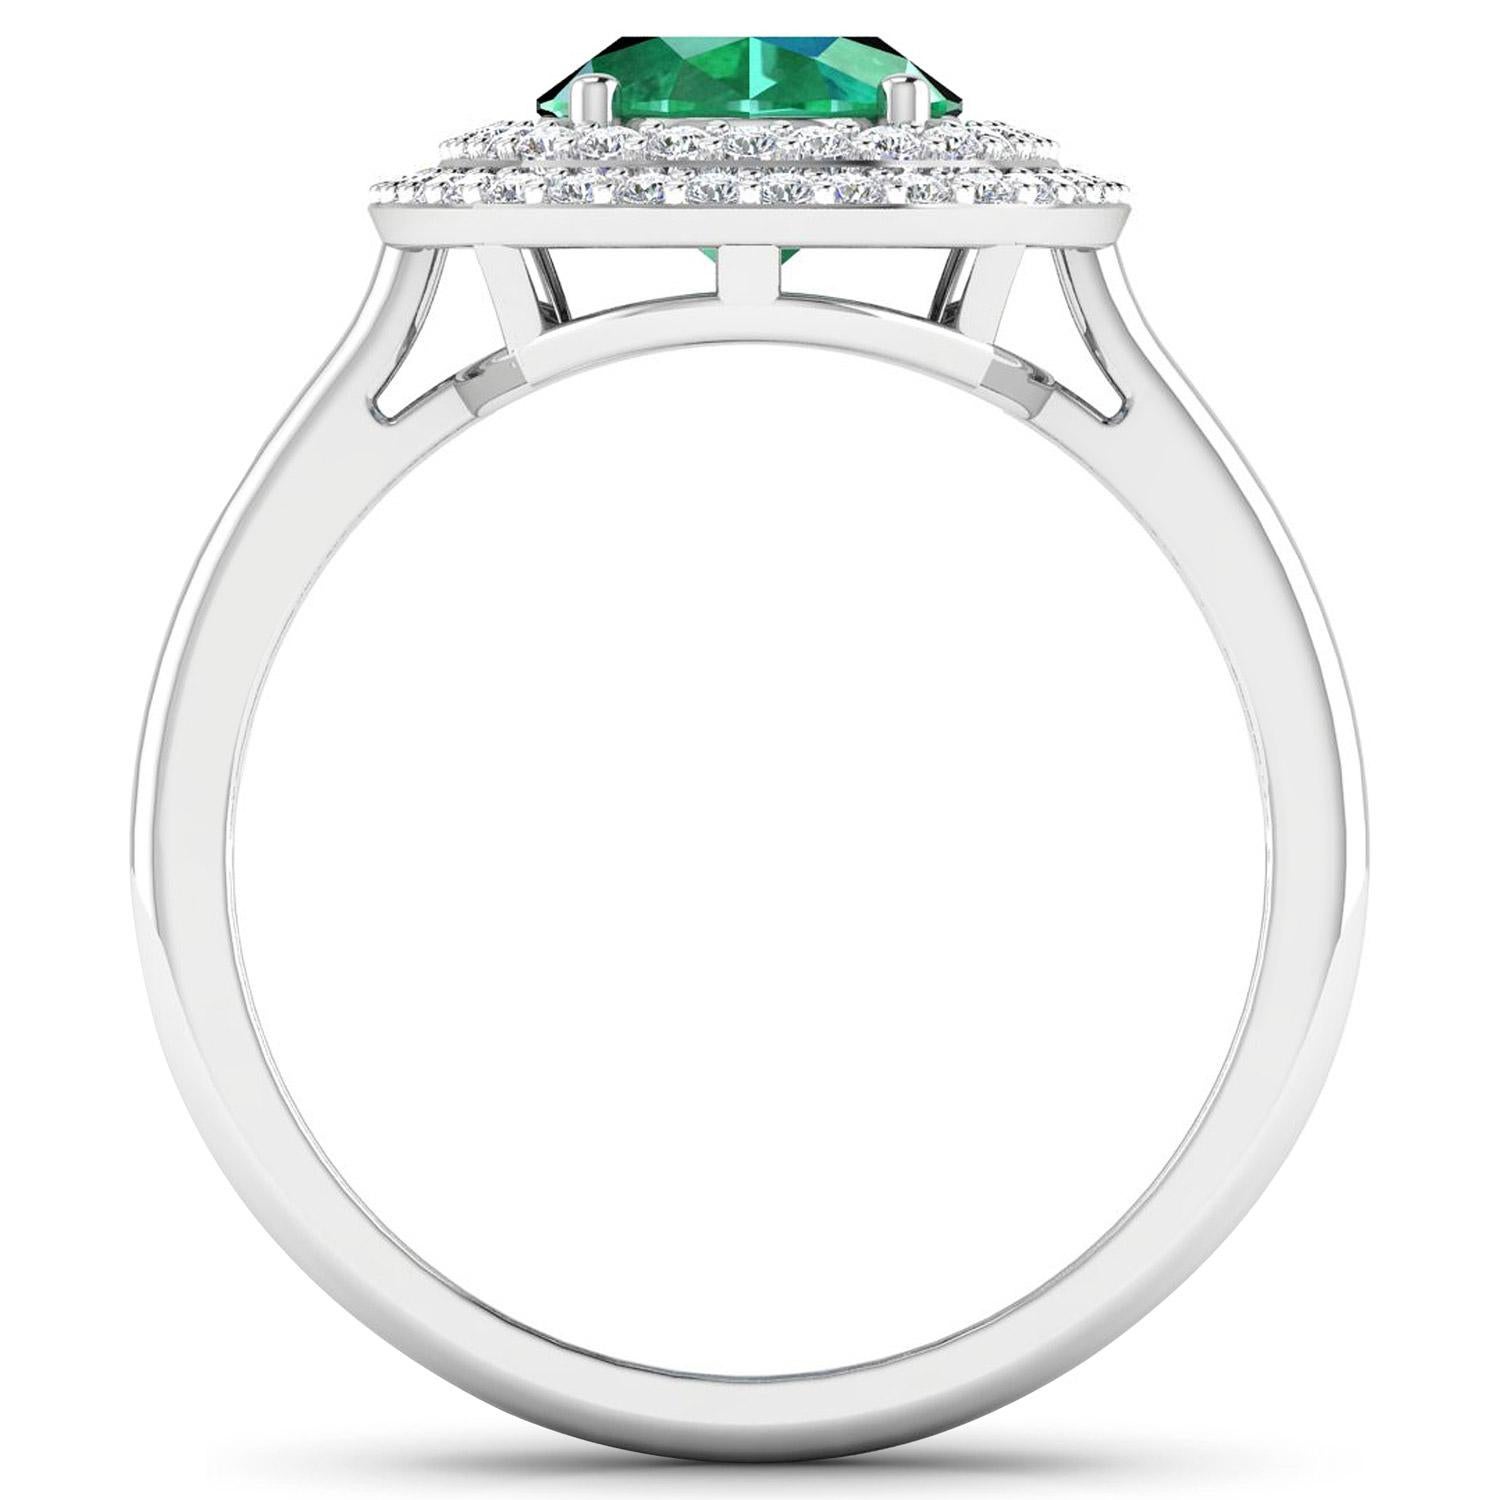 It comes with the appraisal by GIA GG/AJP
Emerald = 1.70 Carat
Stone Size: 9 x 7 mm
Cut: Oval
Diamonds = 0.35 Carats
Stone Quantity: 62
Metal: 14K White Gold
Height: 6.5 mm
Width: 12 mm
Length: 13 mm
Ring Size: 8* US
*It can be resized complimentary